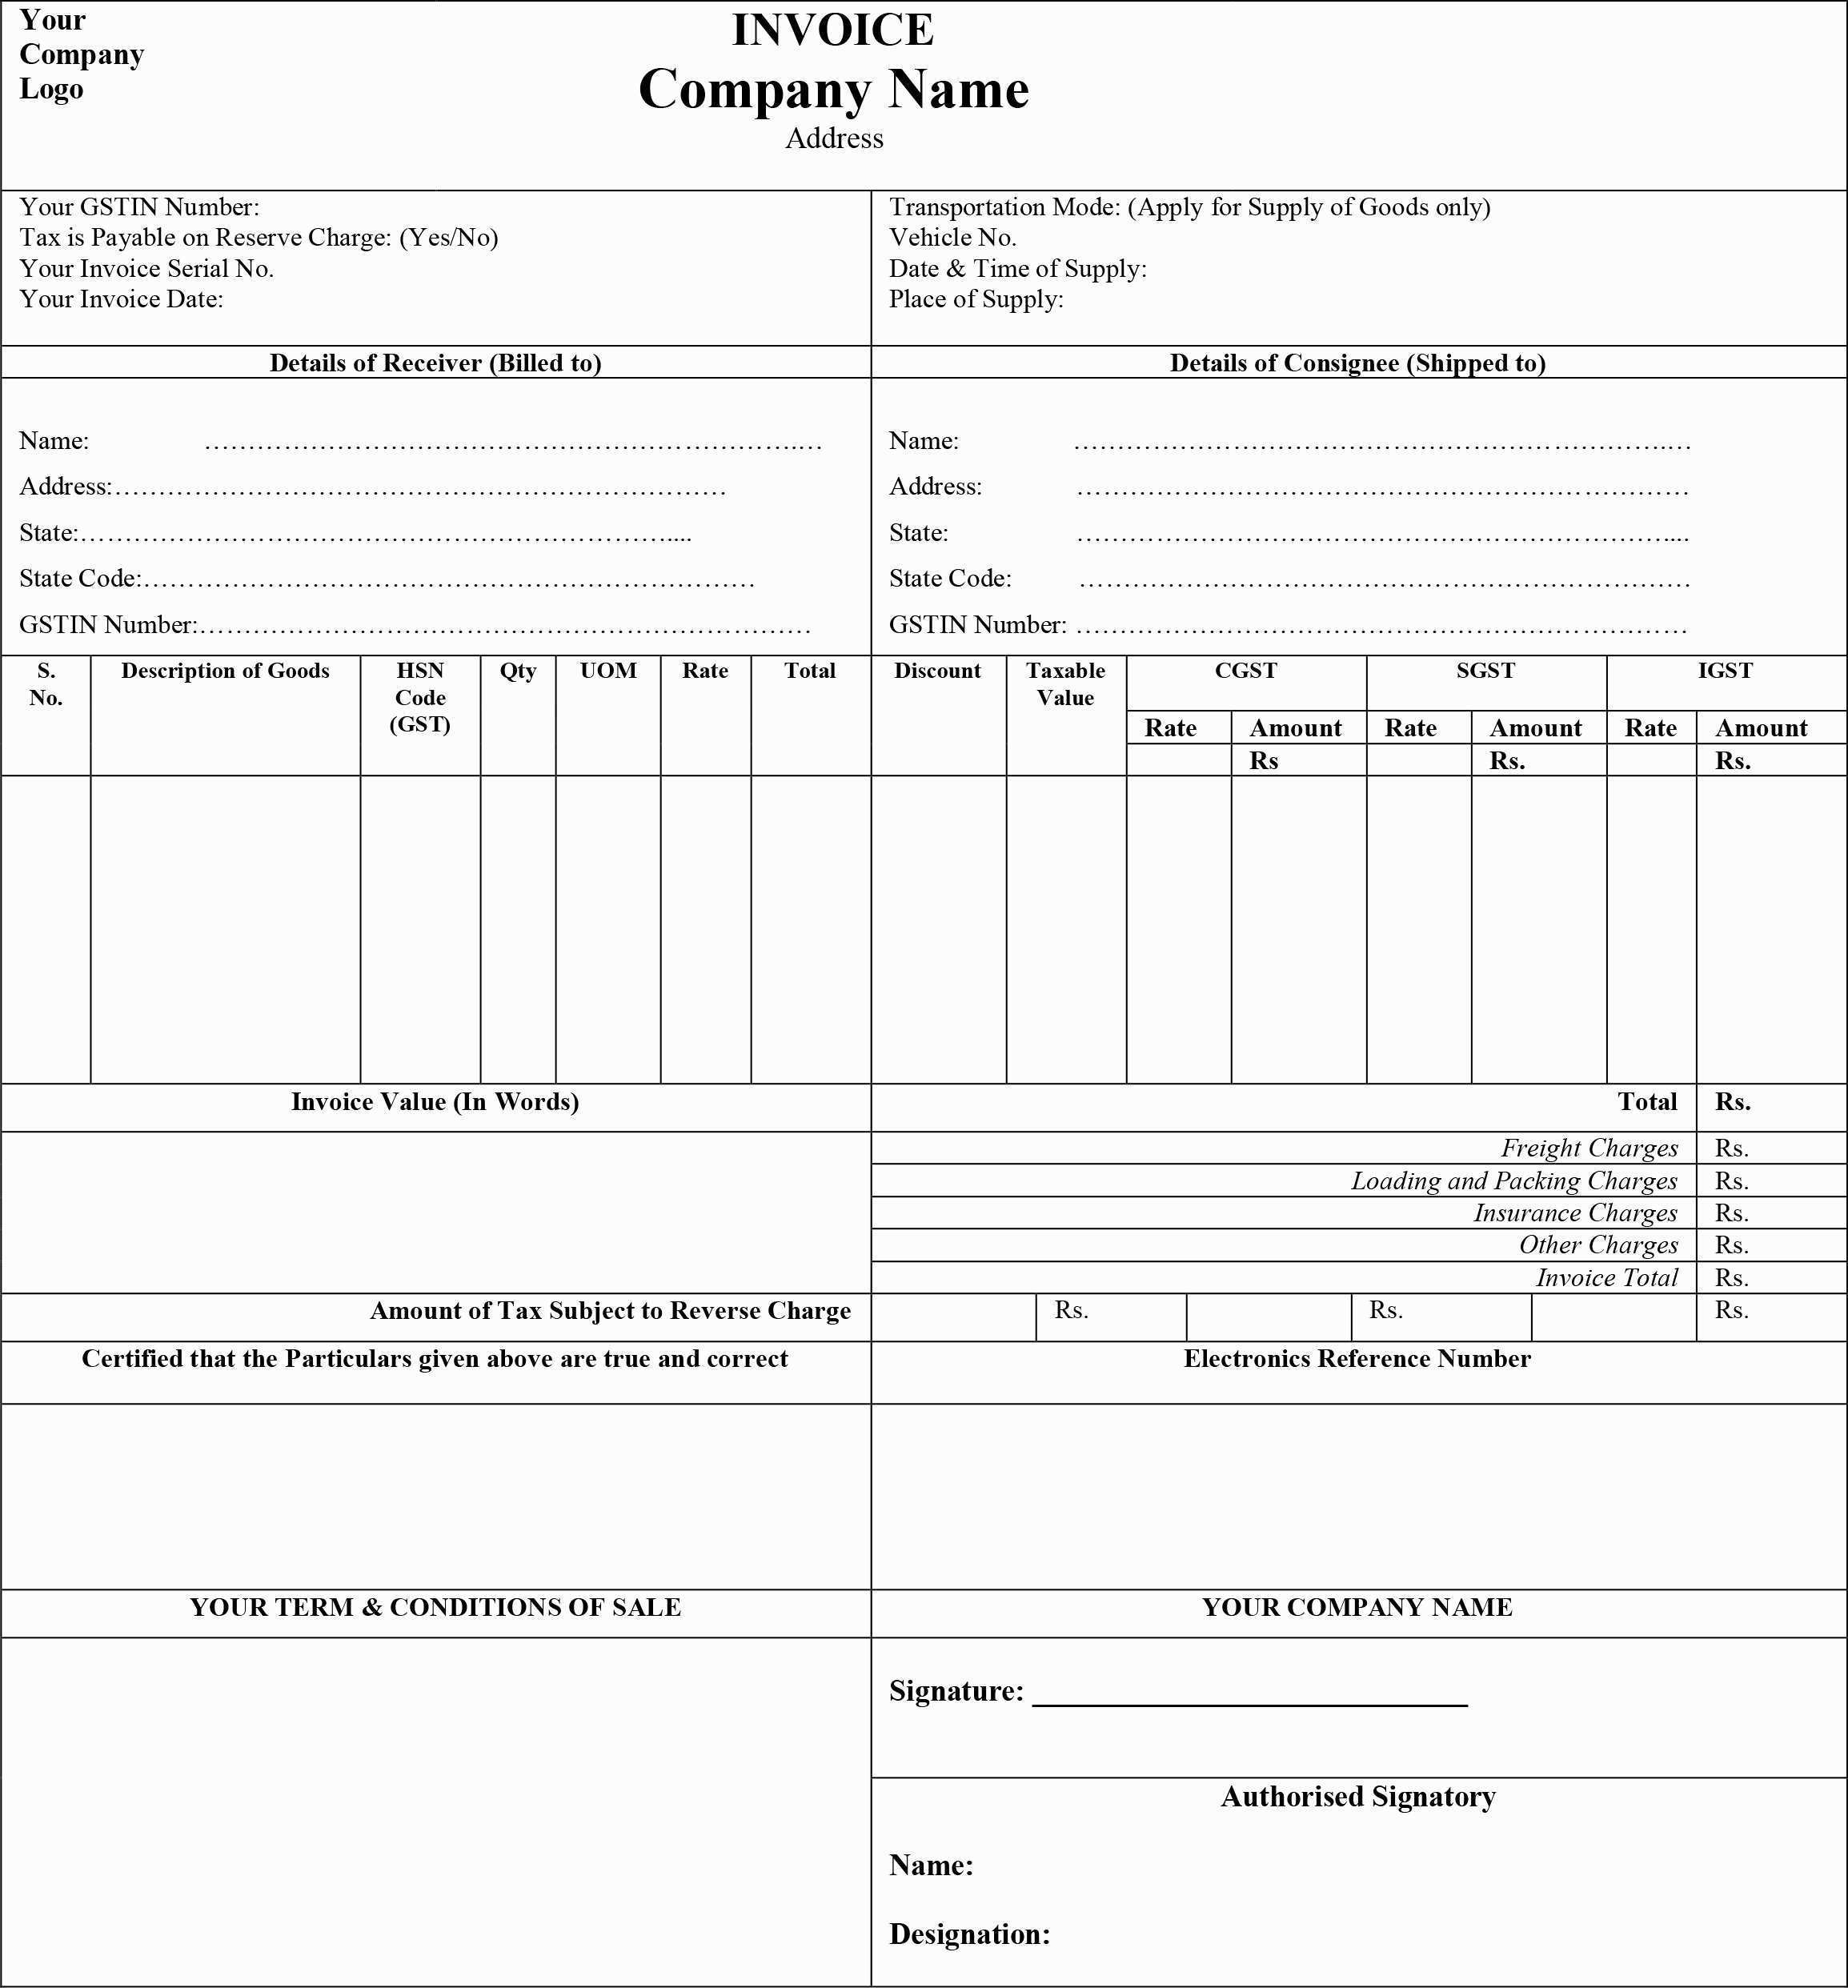 95 Free Blank Tax Invoice Format In Excel Templates with Blank Tax Invoice Format In Excel